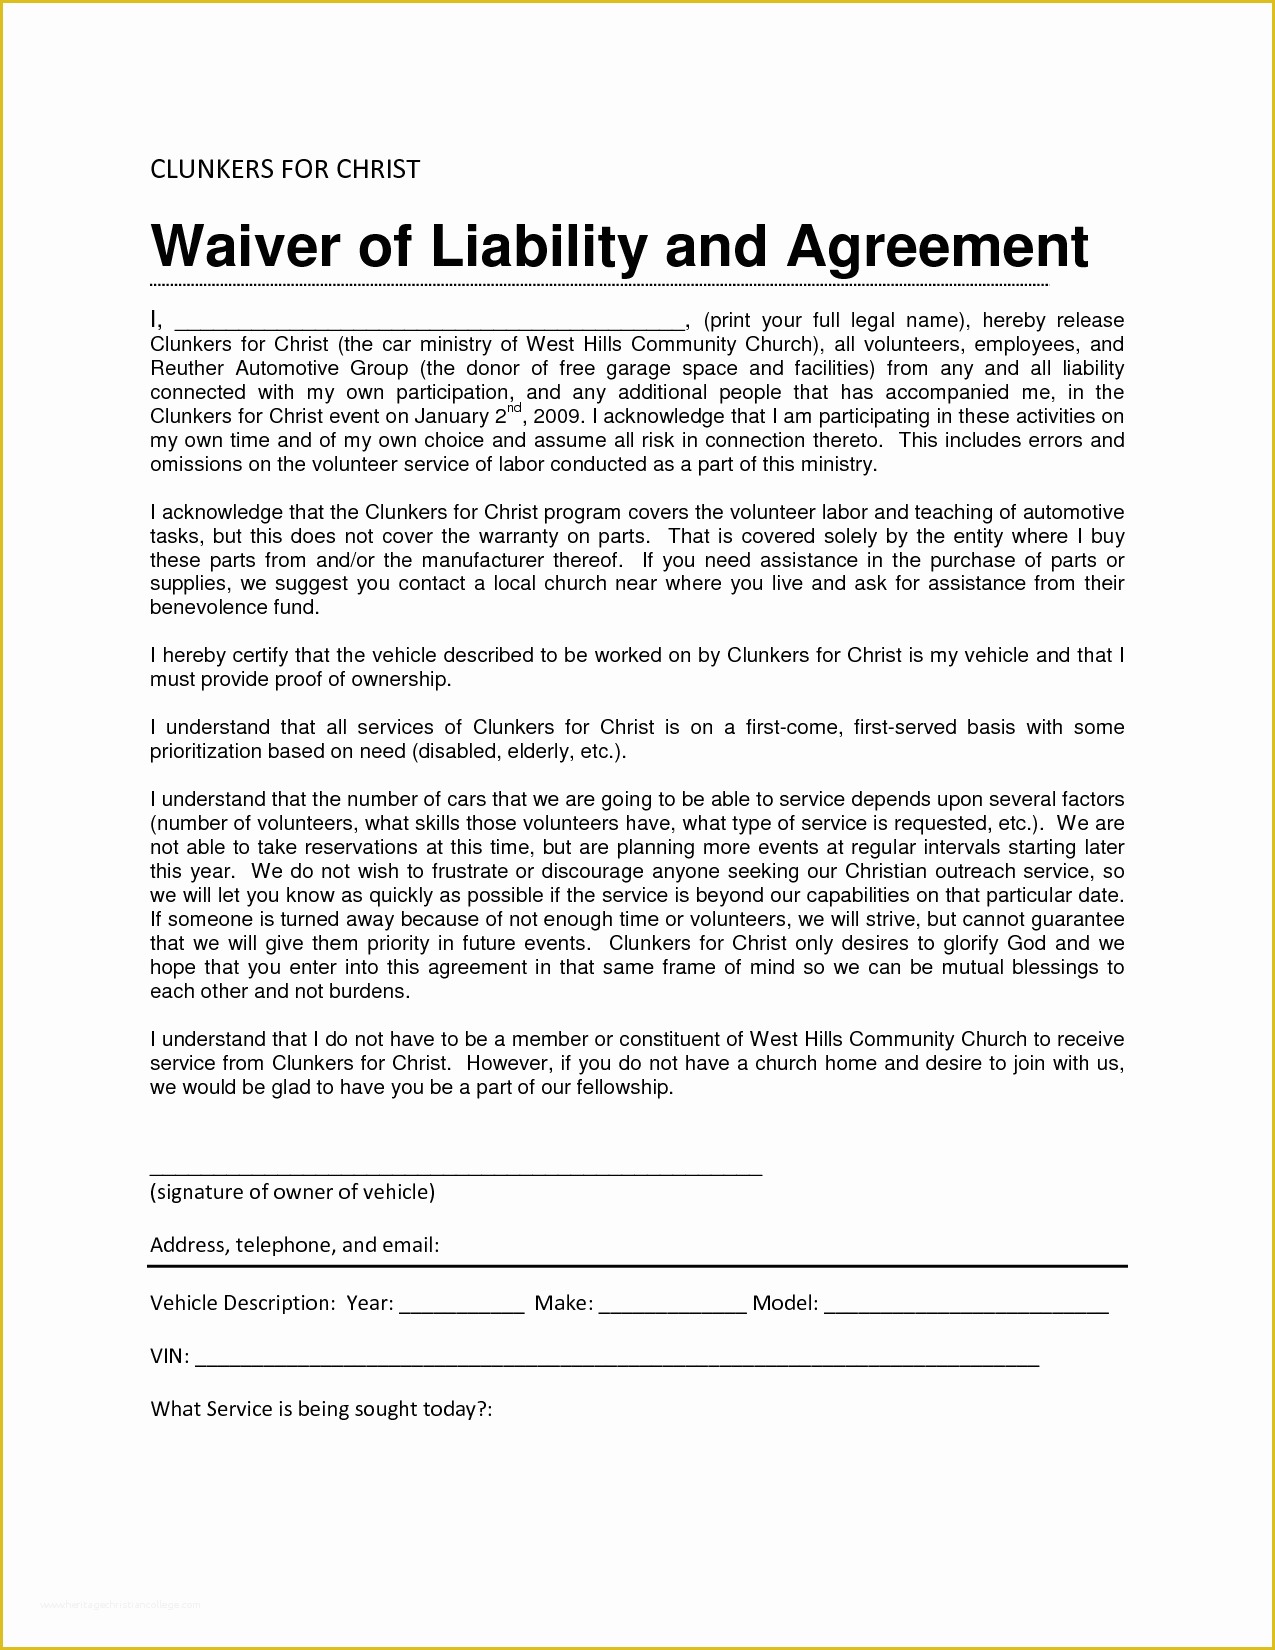 Free Liability Release form Template Of Liability Waiver Example the History Of Liability Waiver